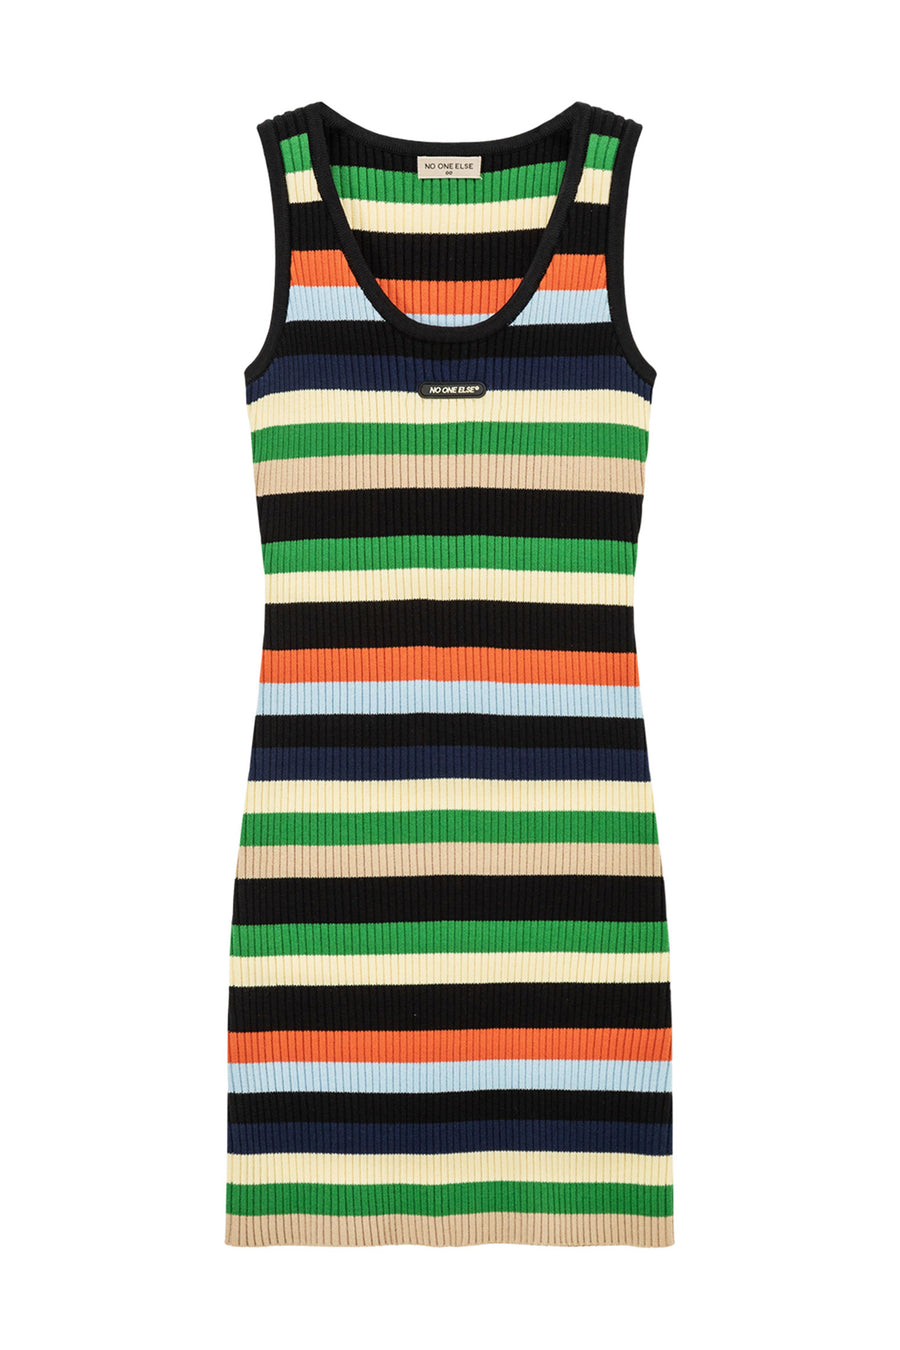 Color Contrast Striped Sleeveless Knit Dress